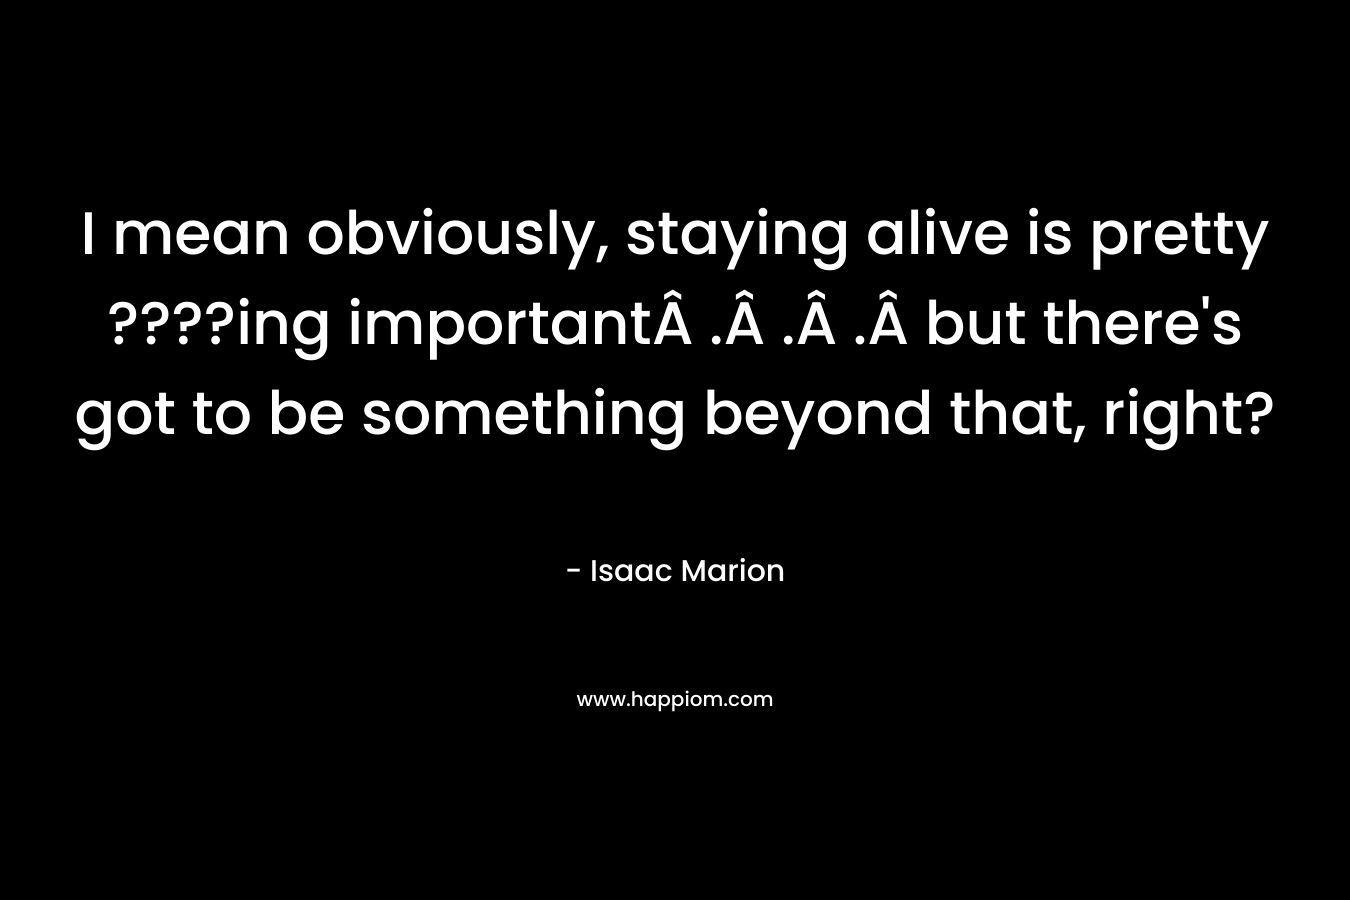 I mean obviously, staying alive is pretty ????ing importantÂ .Â .Â .Â but there’s got to be something beyond that, right? – Isaac Marion